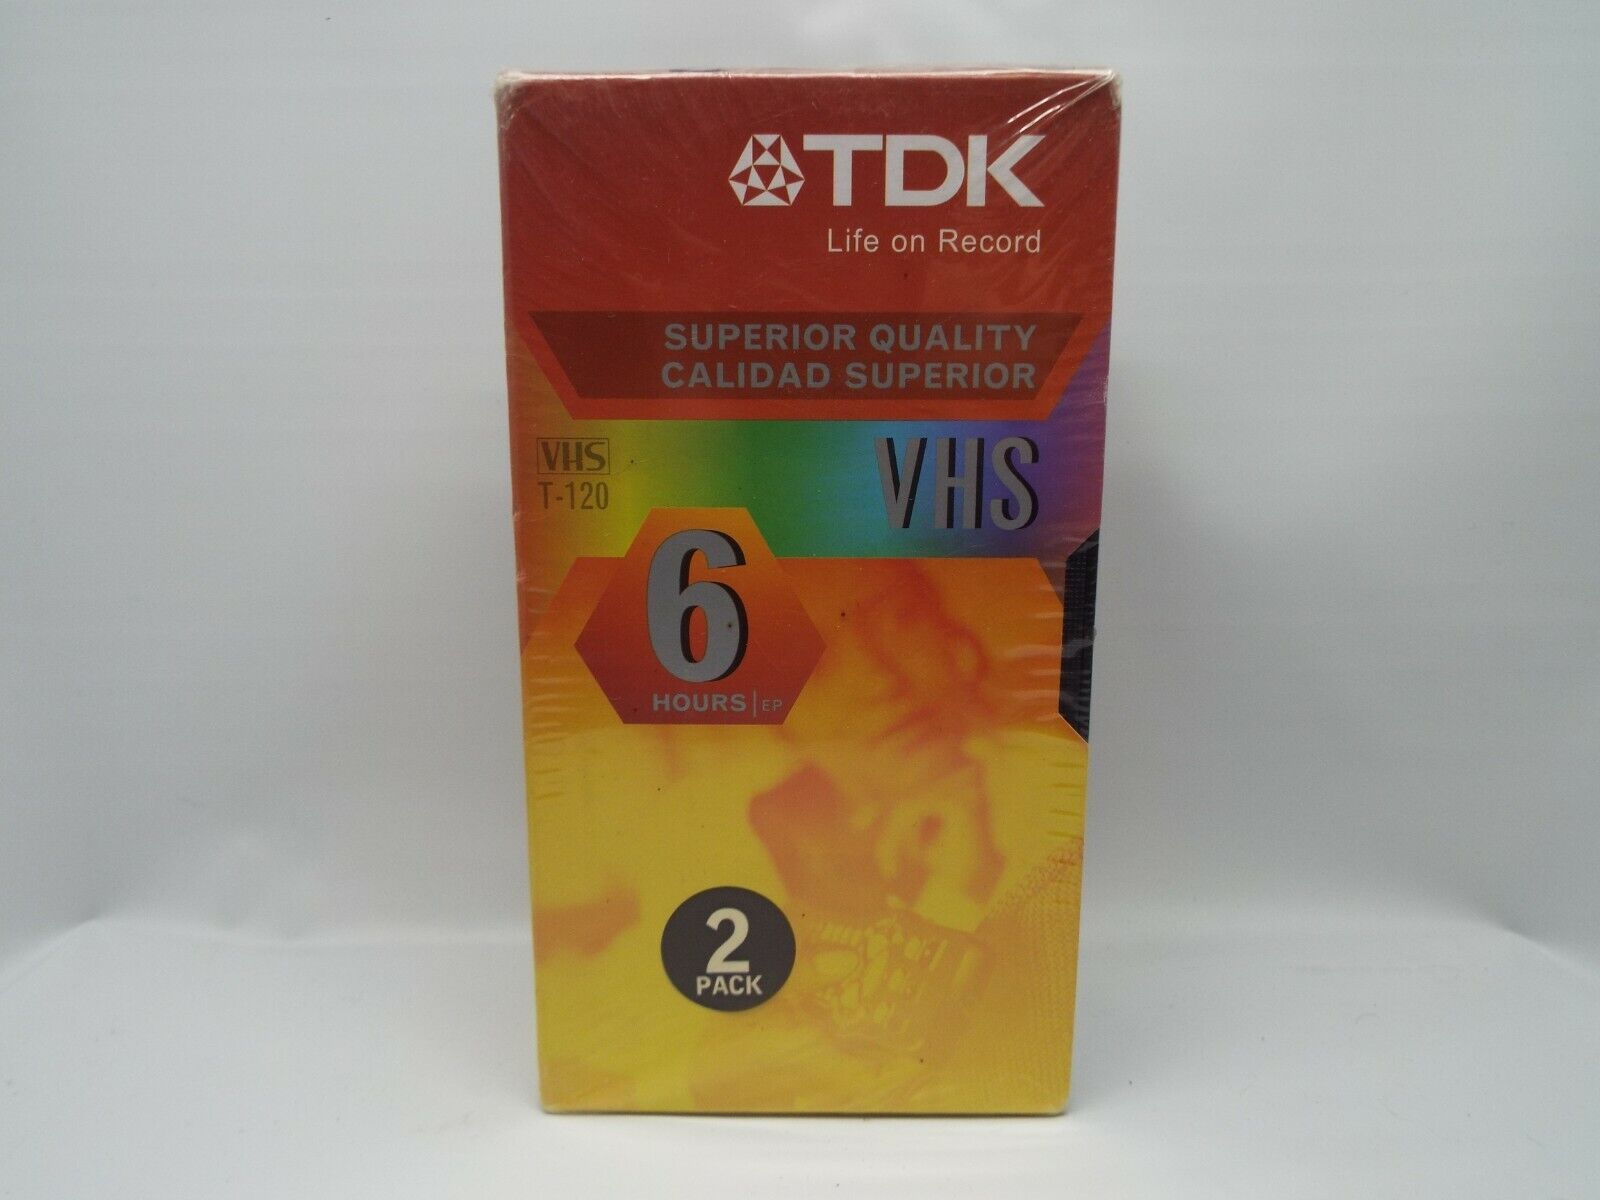 TDK Superior Quality 2 Pack Blank VHS Tape T-120 6 Hour New Se...